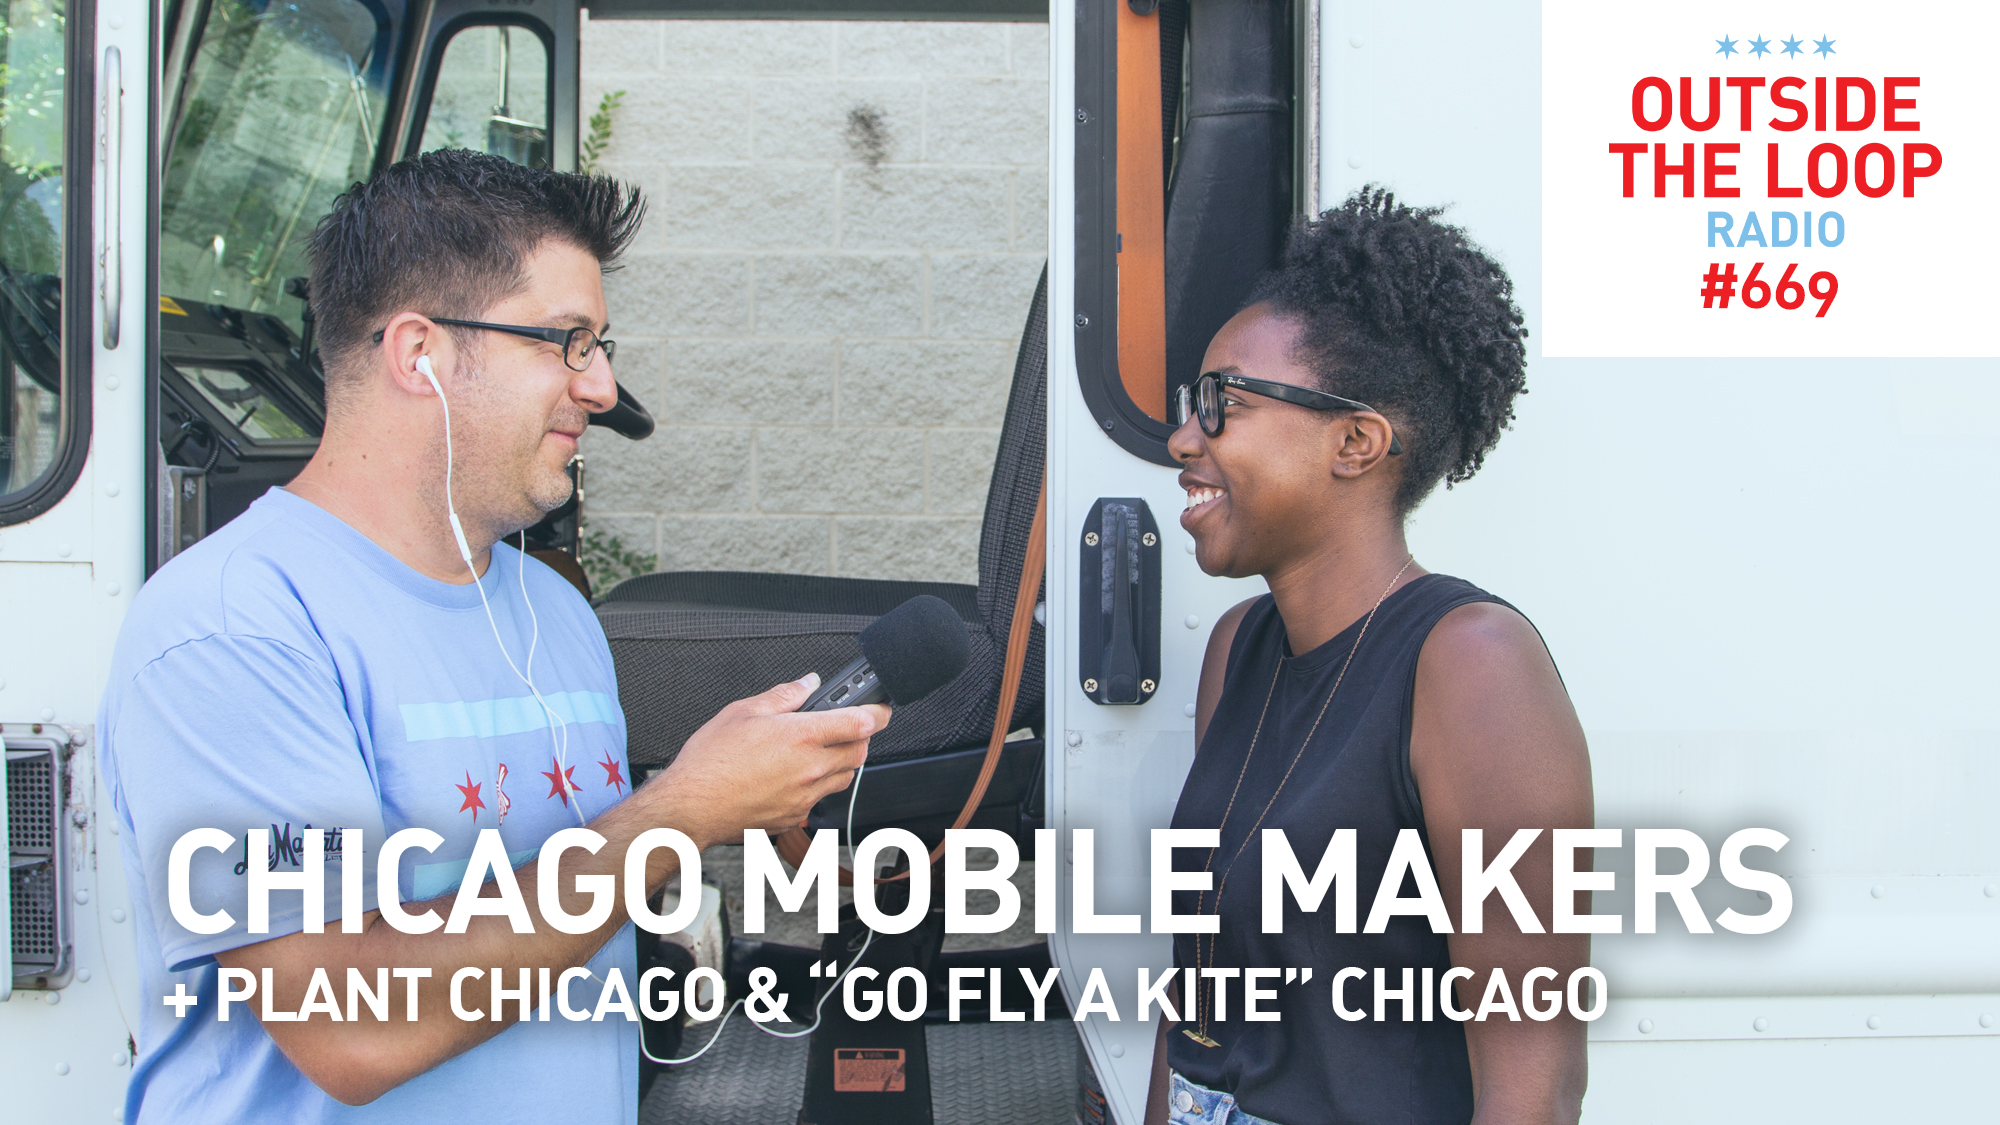 Mike Stephen interviews Chicago Mobile Makers founder Maya Bird-Murphy outside of the future Mobile Maker Van.